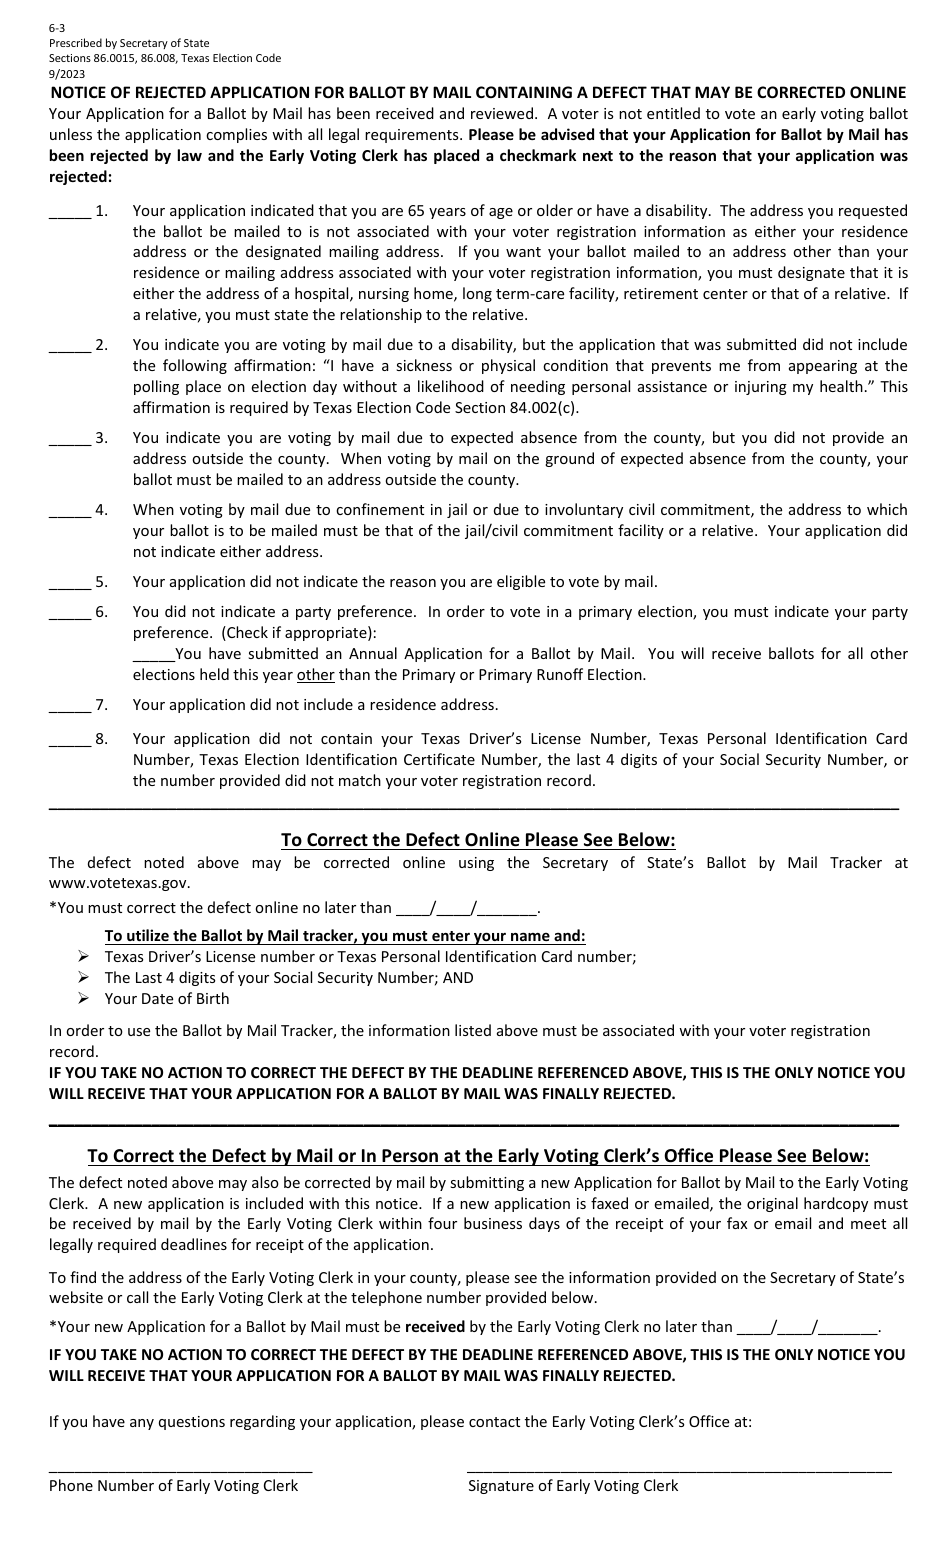 Form 6-3 Notice of Rejected Application for Ballot by Mail Containing a Defect That May Be Corrected Online - Texas (English / Spanish), Page 1